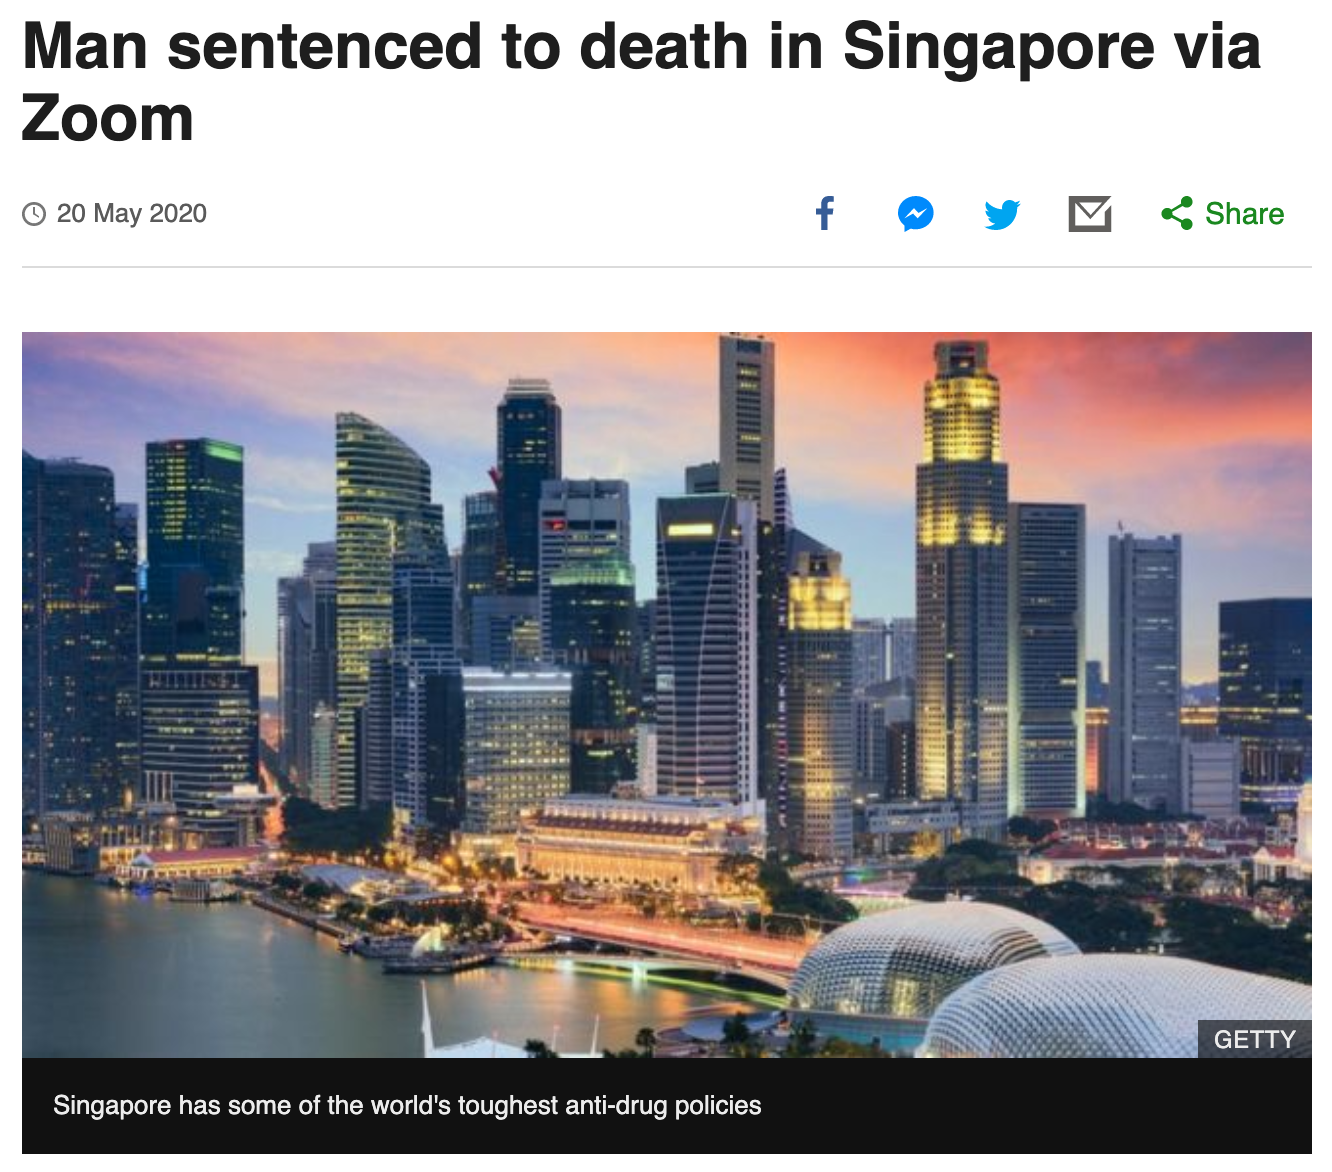 Man sentenced to death in Singapore via Zoom - Singapore has some of the world's toughest anti-drug policies